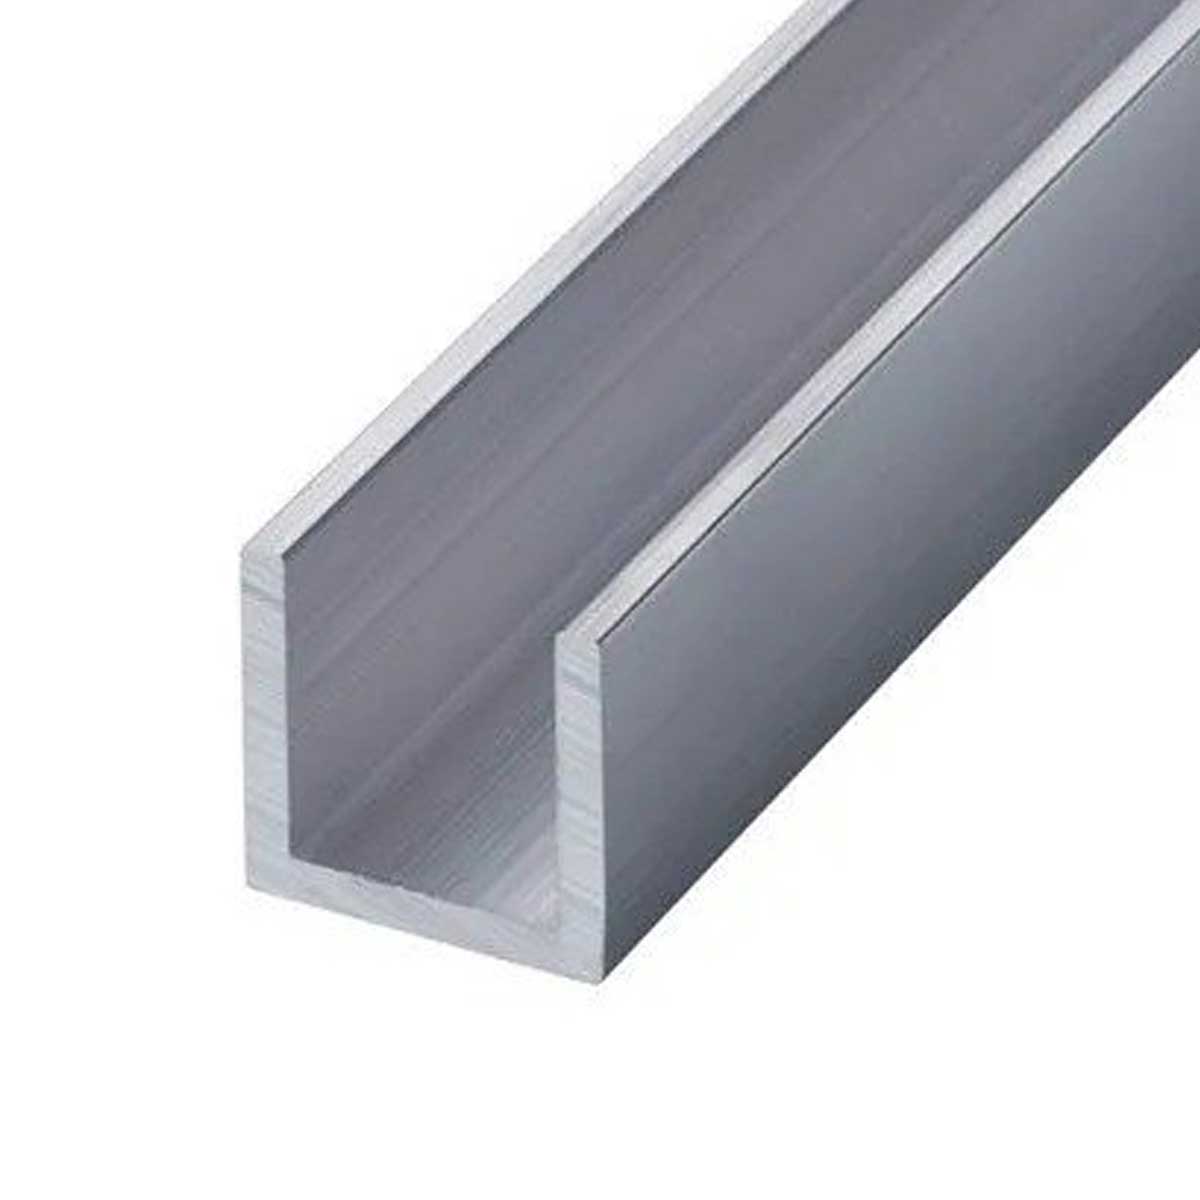 Aluminium C Channel For Construction Manufacturers, Suppliers in Gujarat 